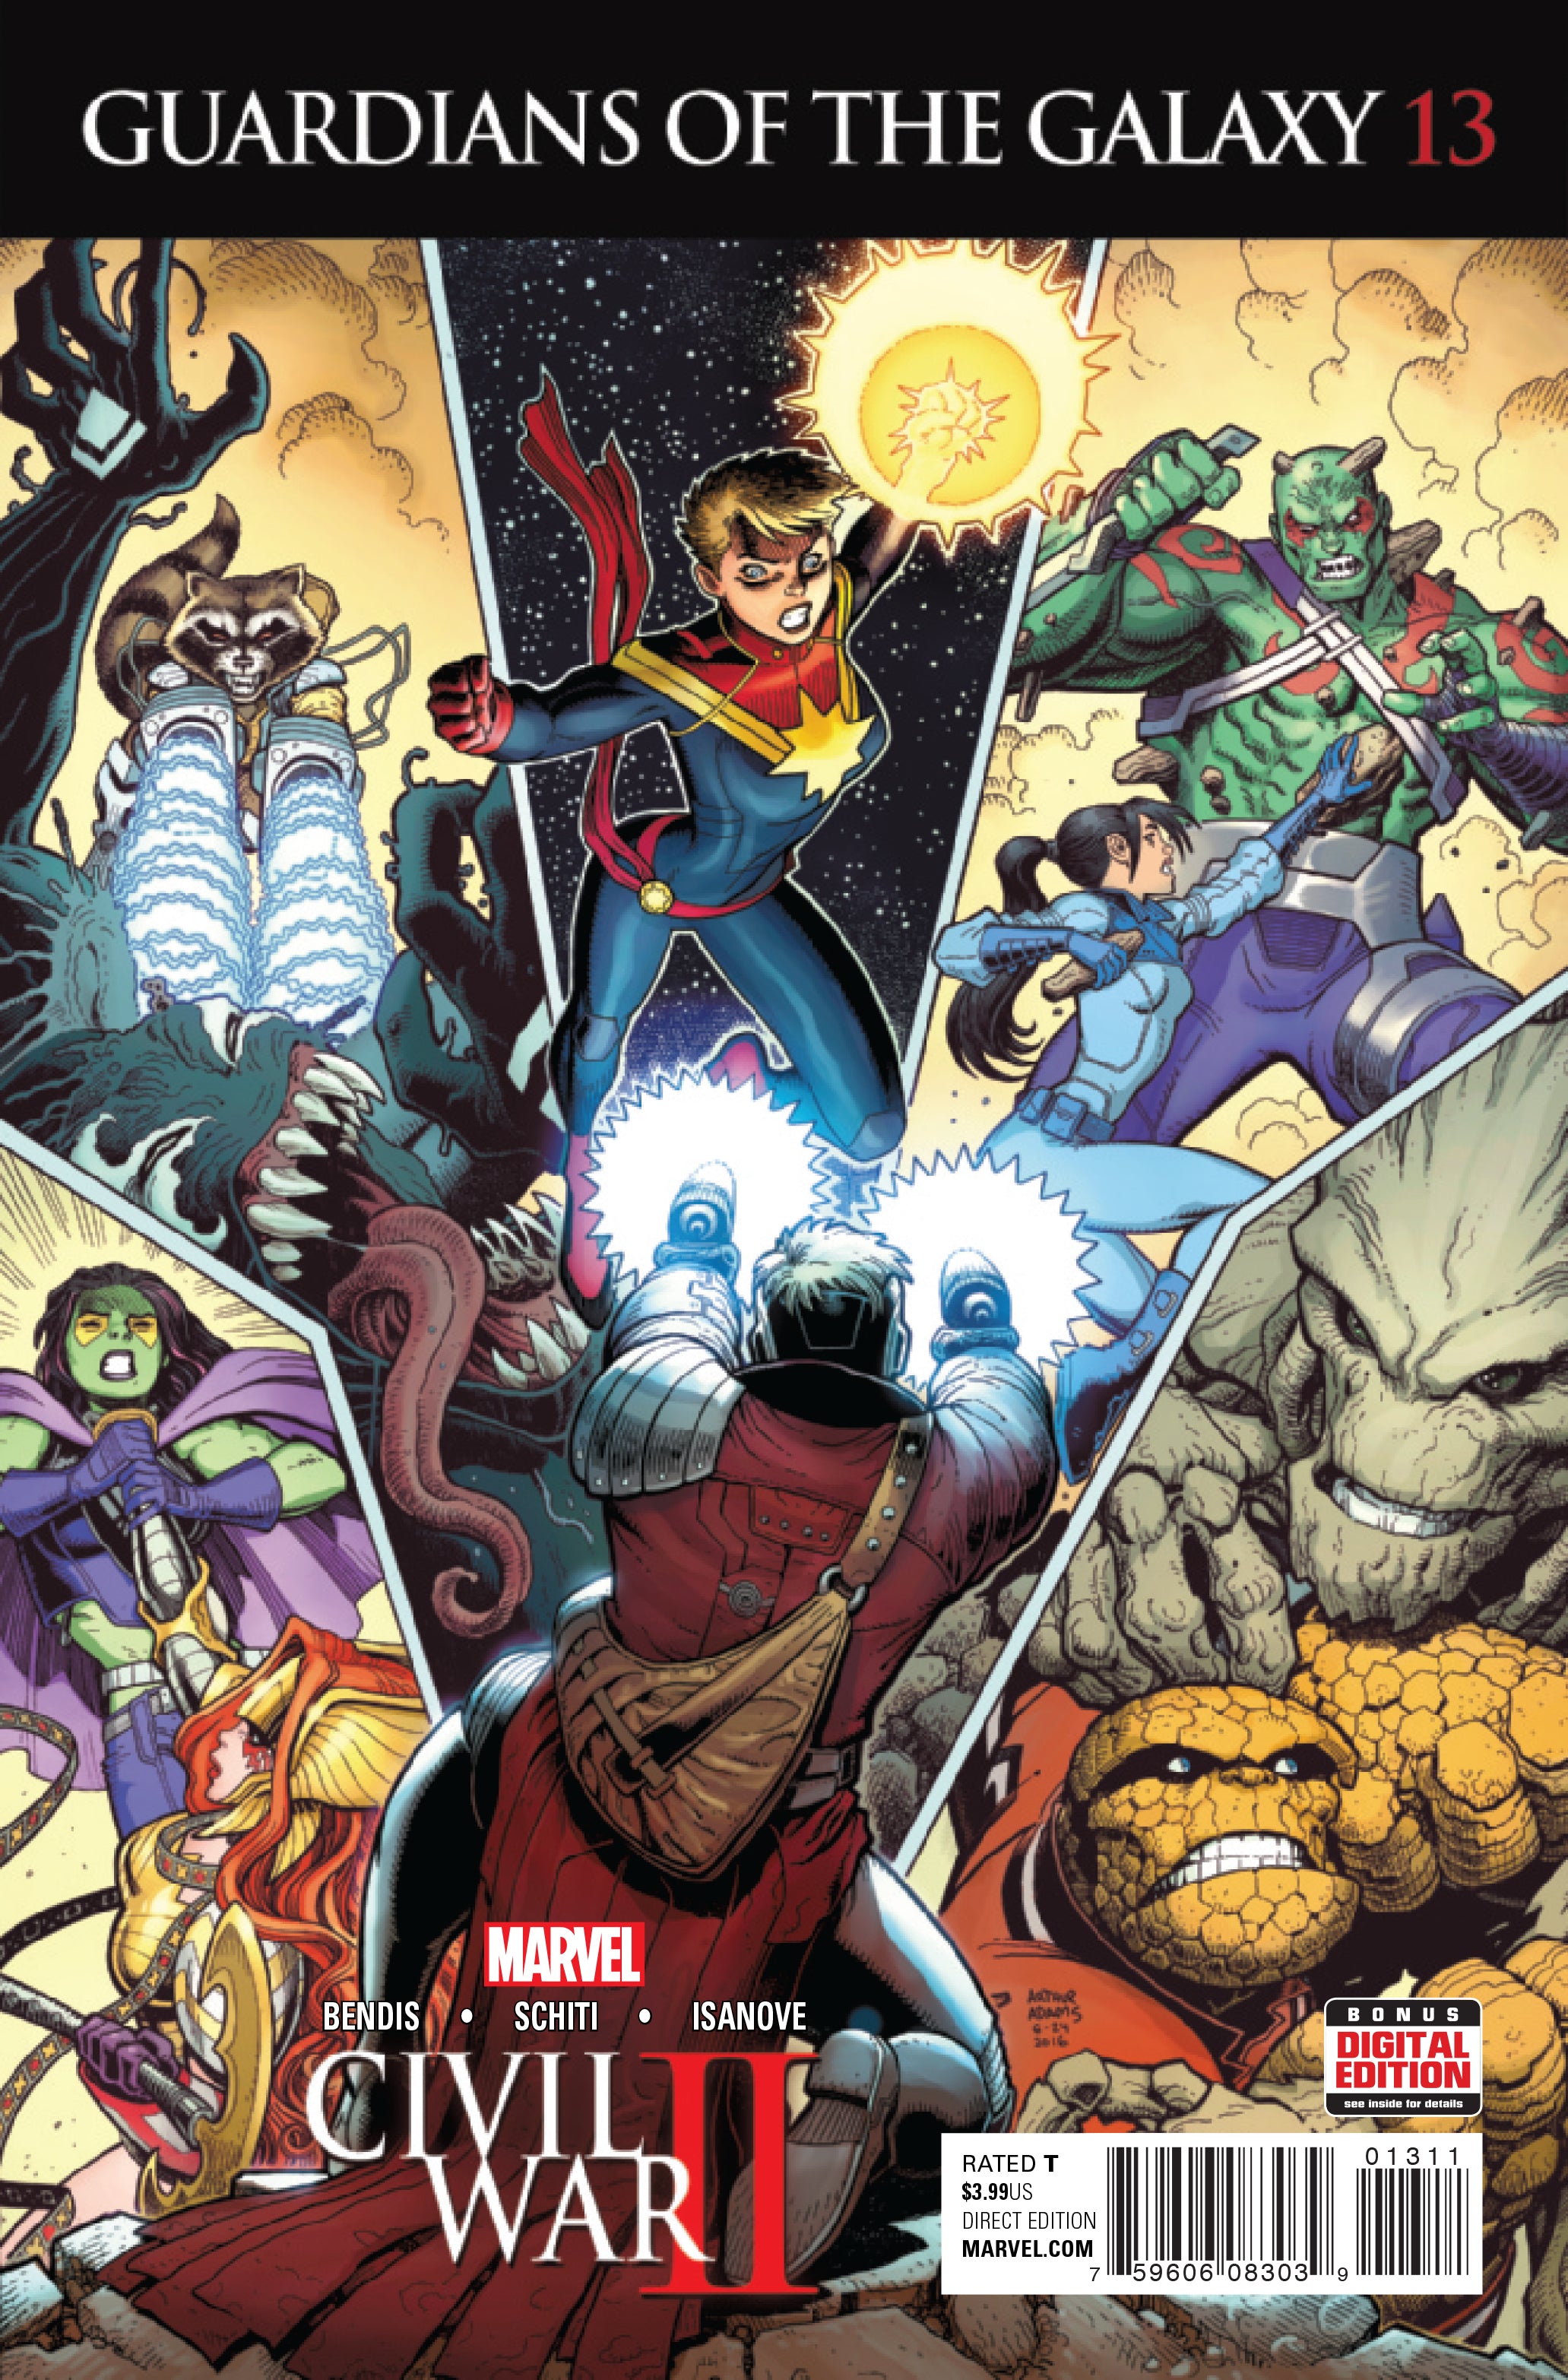 GUARDIANS OF GALAXY #13 CW2 | Game Master's Emporium (The New GME)